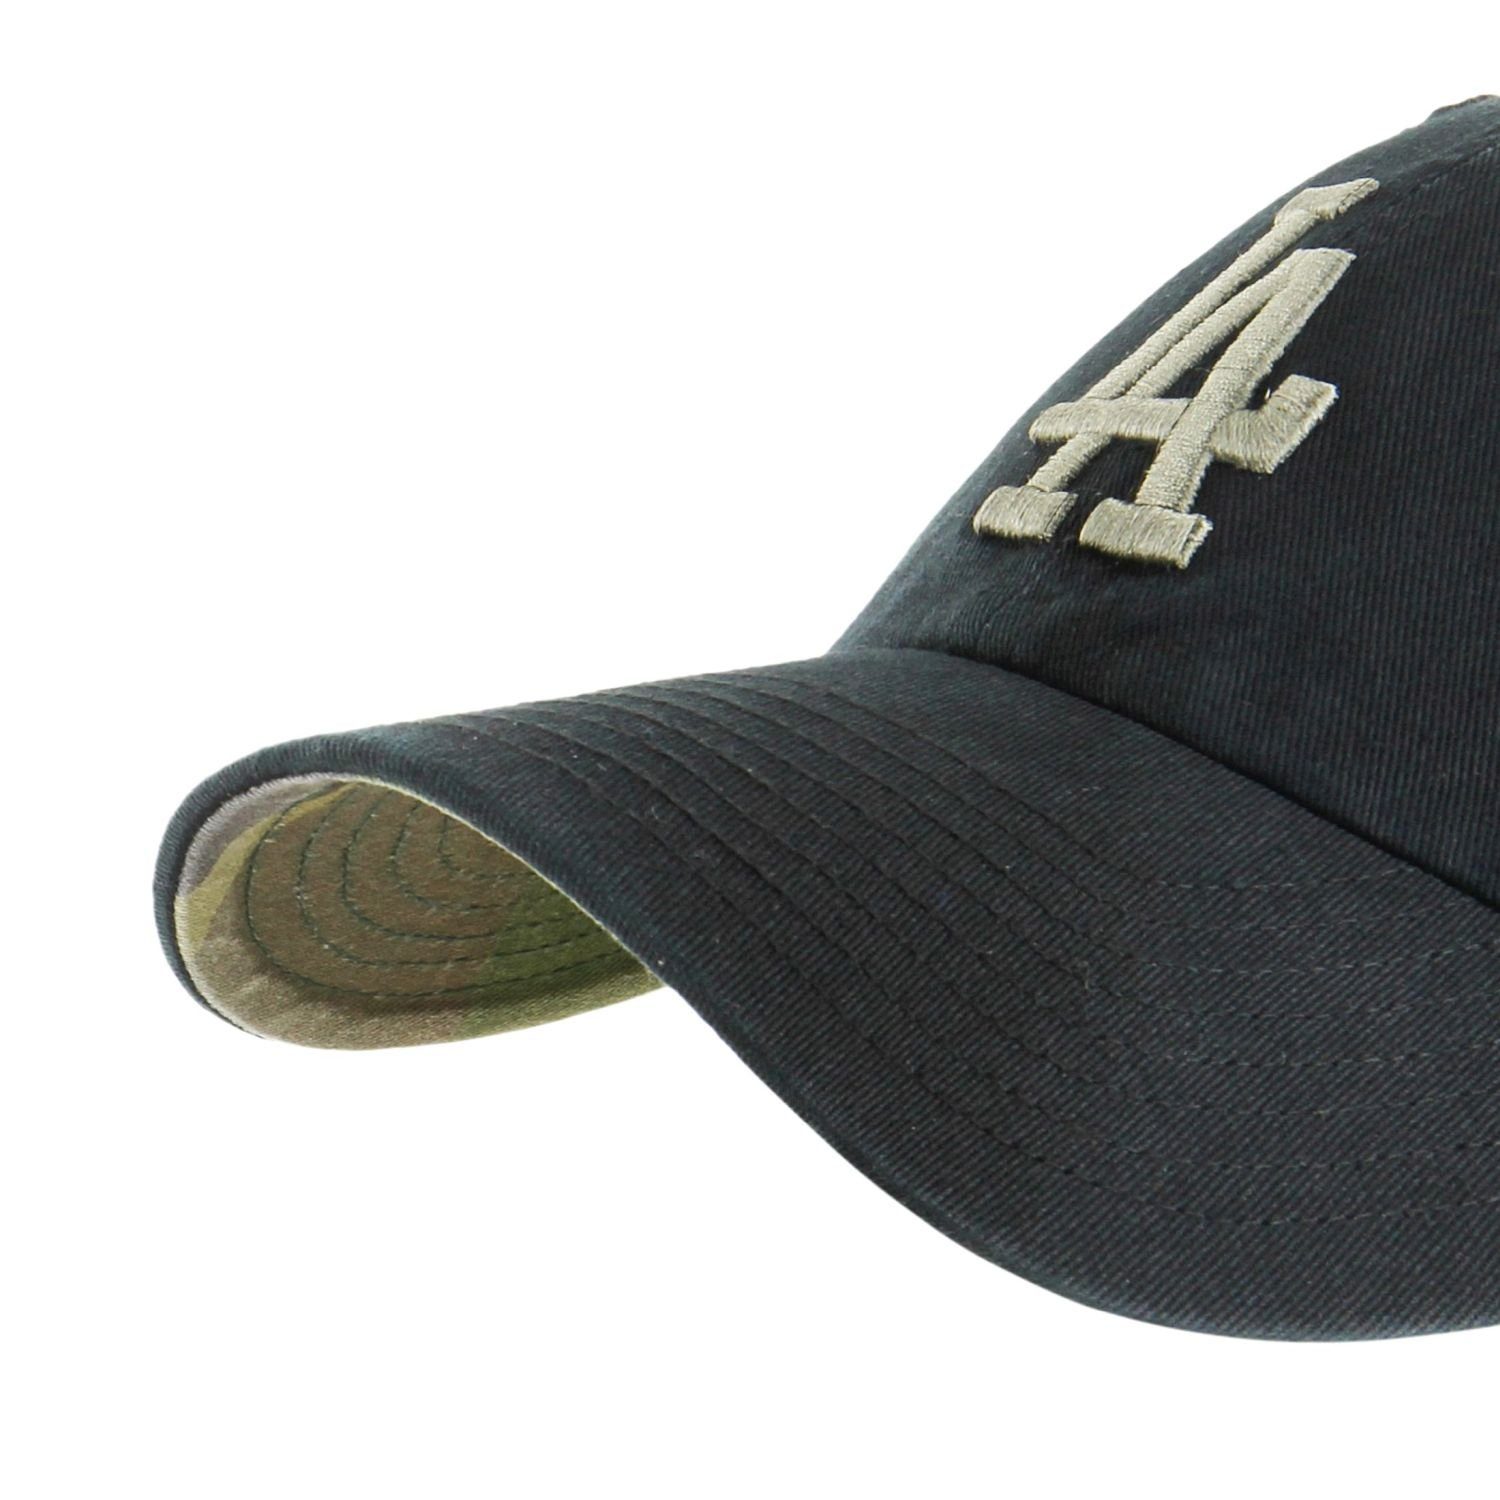 x27;47 Brand CLEAN Los Angeles Dodgers Cap Fit Relaxed Trucker UP